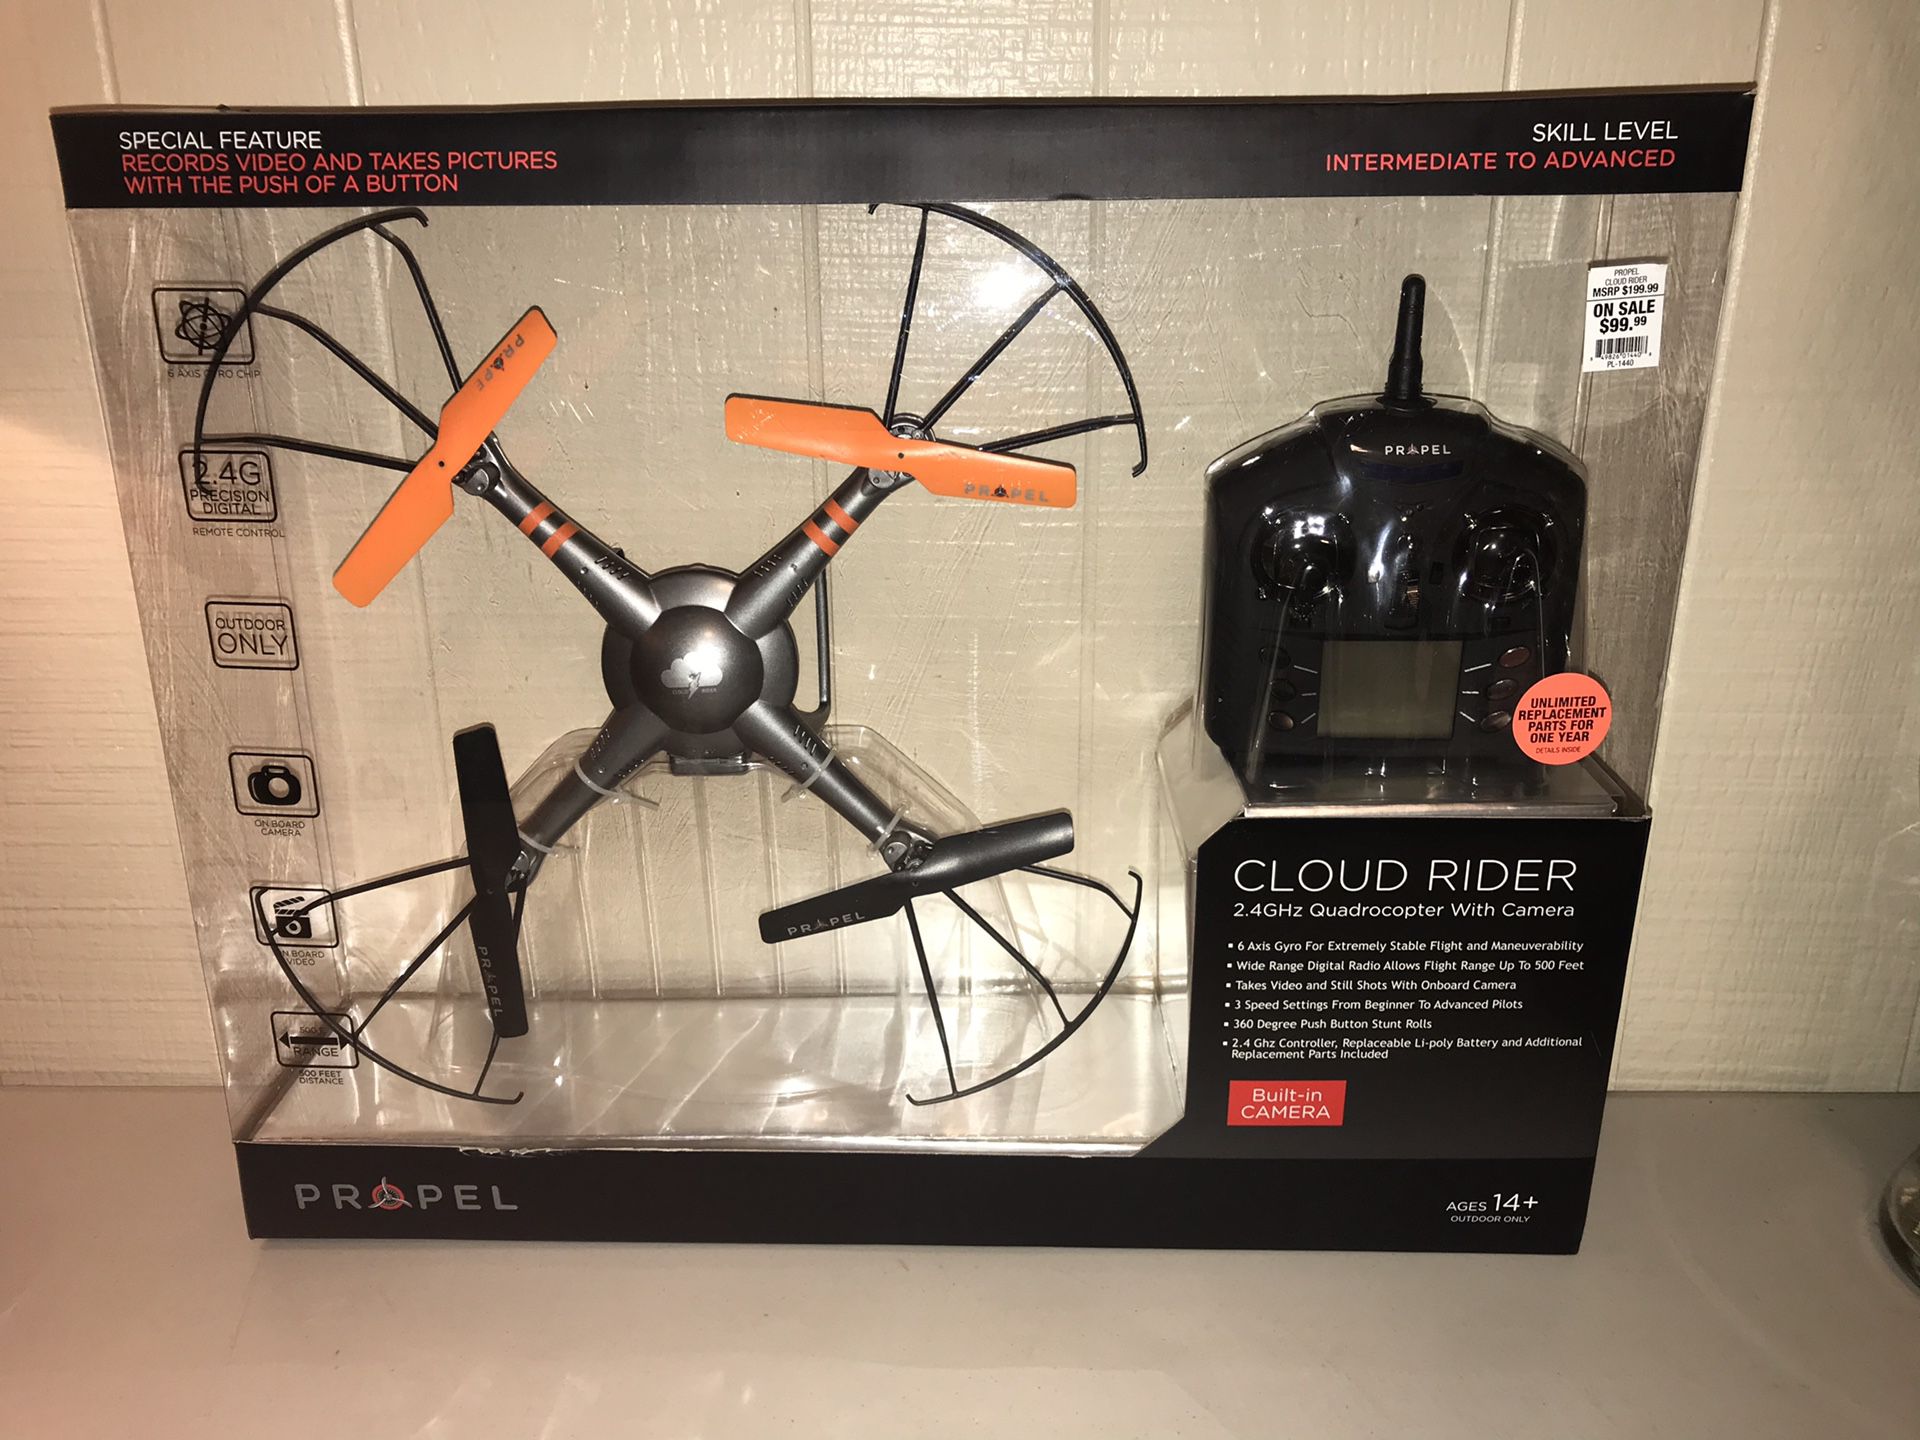 Cloud Rider 2.4 GHz Quadrocopter w/Camera Drone by Propel